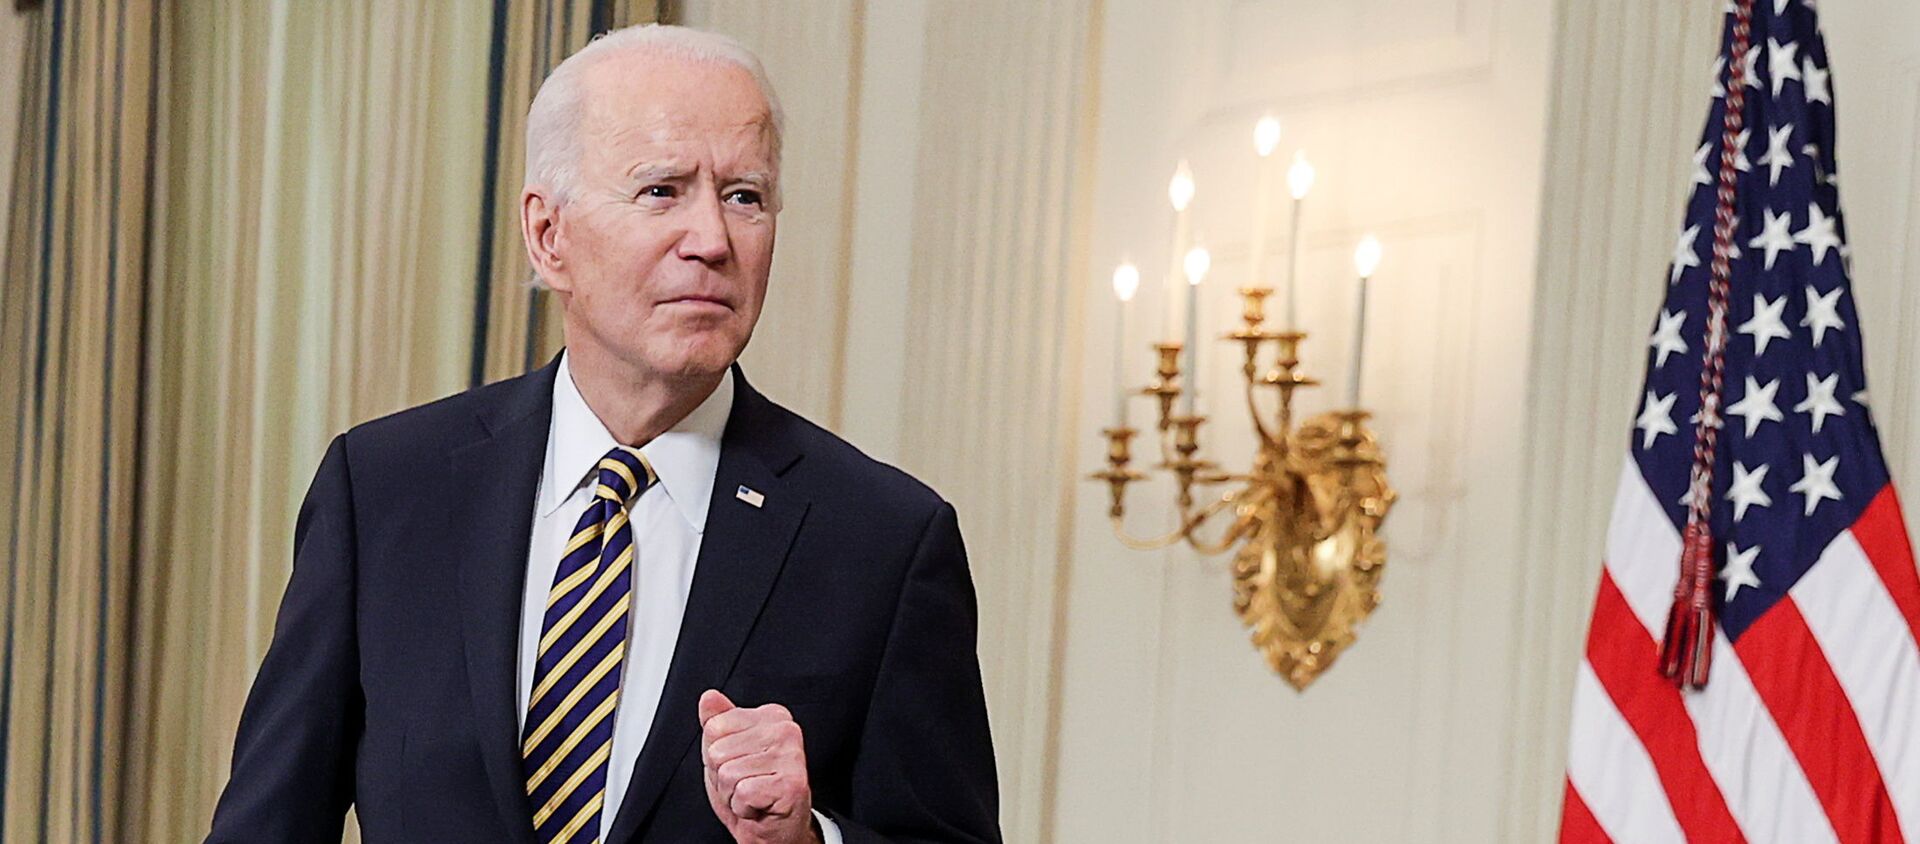 U.S. President Joe Biden listens to a question after delivering remarks and prior to signing an executive order, aimed at addressing a global semiconductor chip shortage, in the State Dining Room at the White House in Washington, U.S., February 24, 2021 - Sputnik Afrique, 1920, 01.03.2021